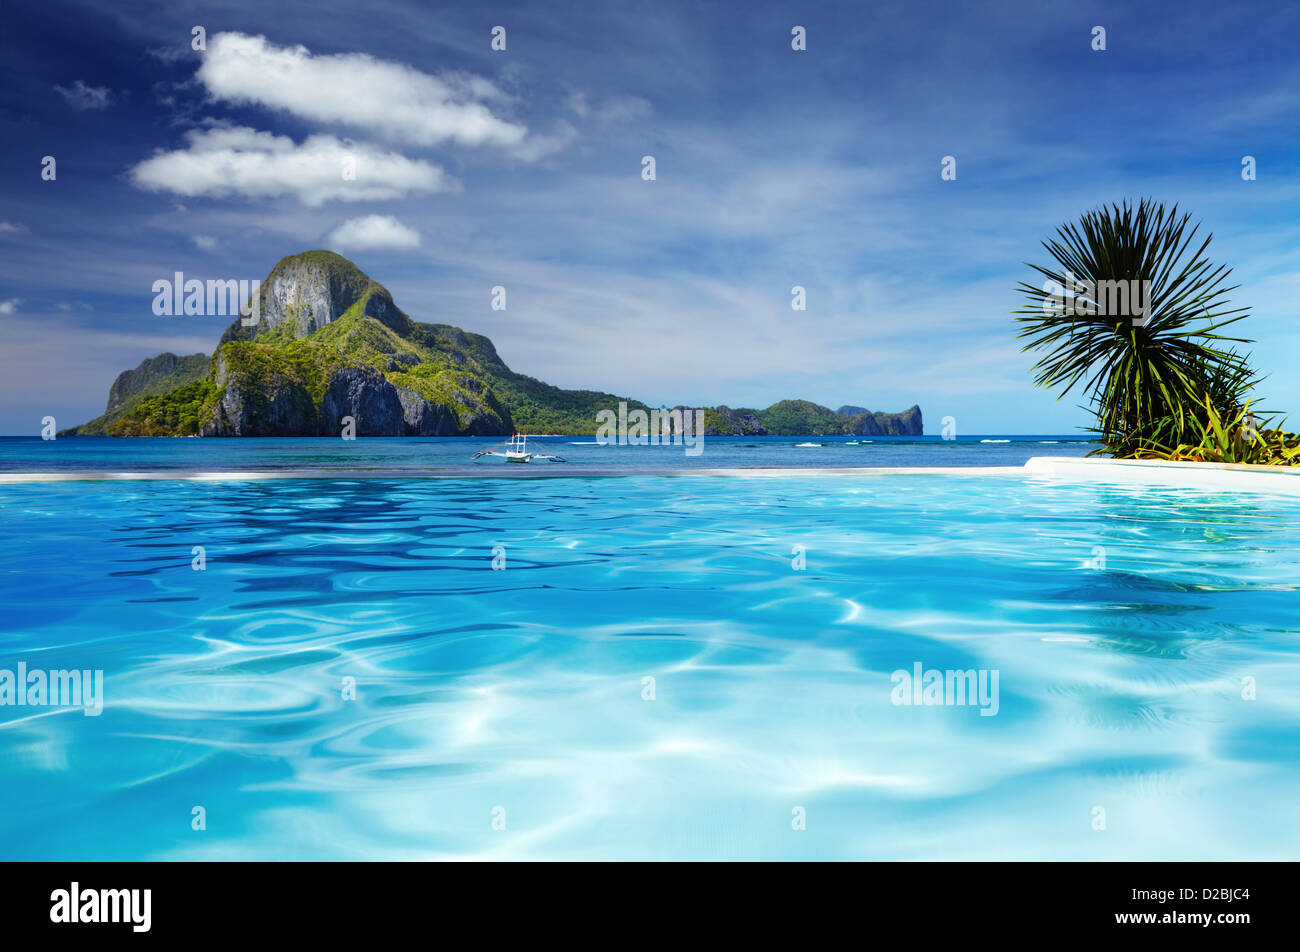 Landscape with swimming pool and Cadlao island on background, El Nido, Philippines Stock Photo